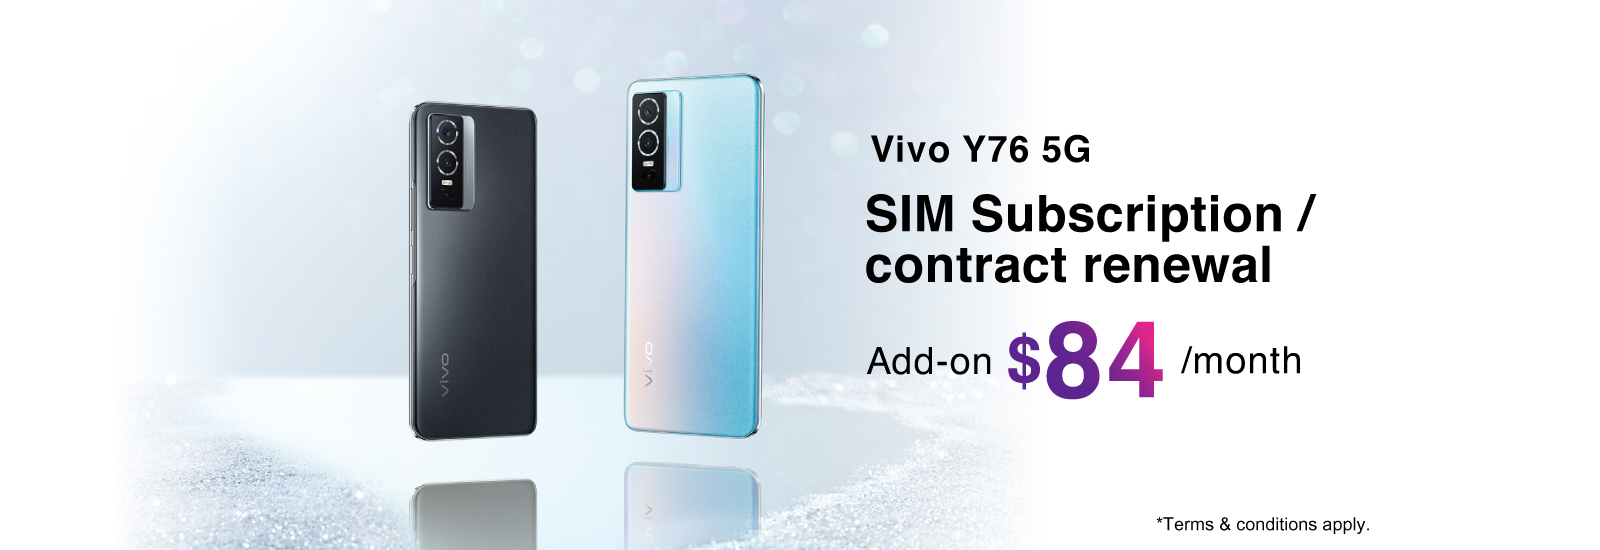 Vivo Y76 5G - Add-on $84/mth up upon SIM Subscription / contract renewal